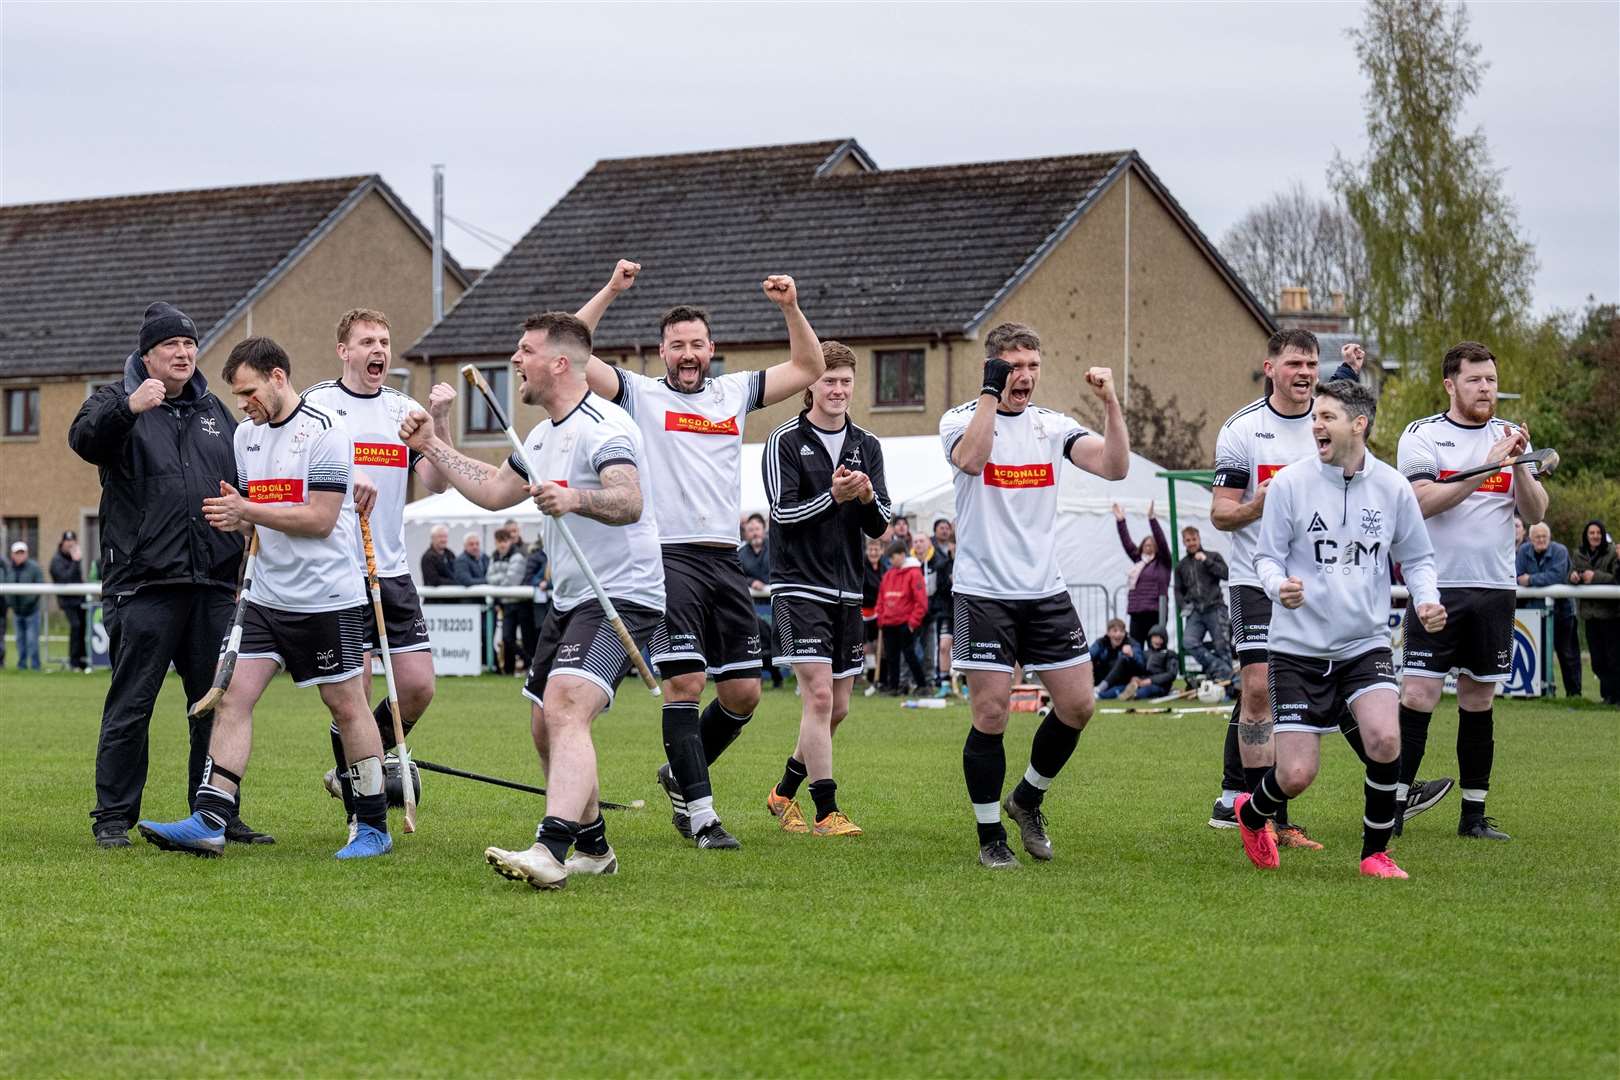 The Lovat team celebrate winning the tie as Craig Mainland scores his penalty. Beauly v Lovat in the Artemis MacAulay Cup 1st Round tie, played at Braeview, Beauly.